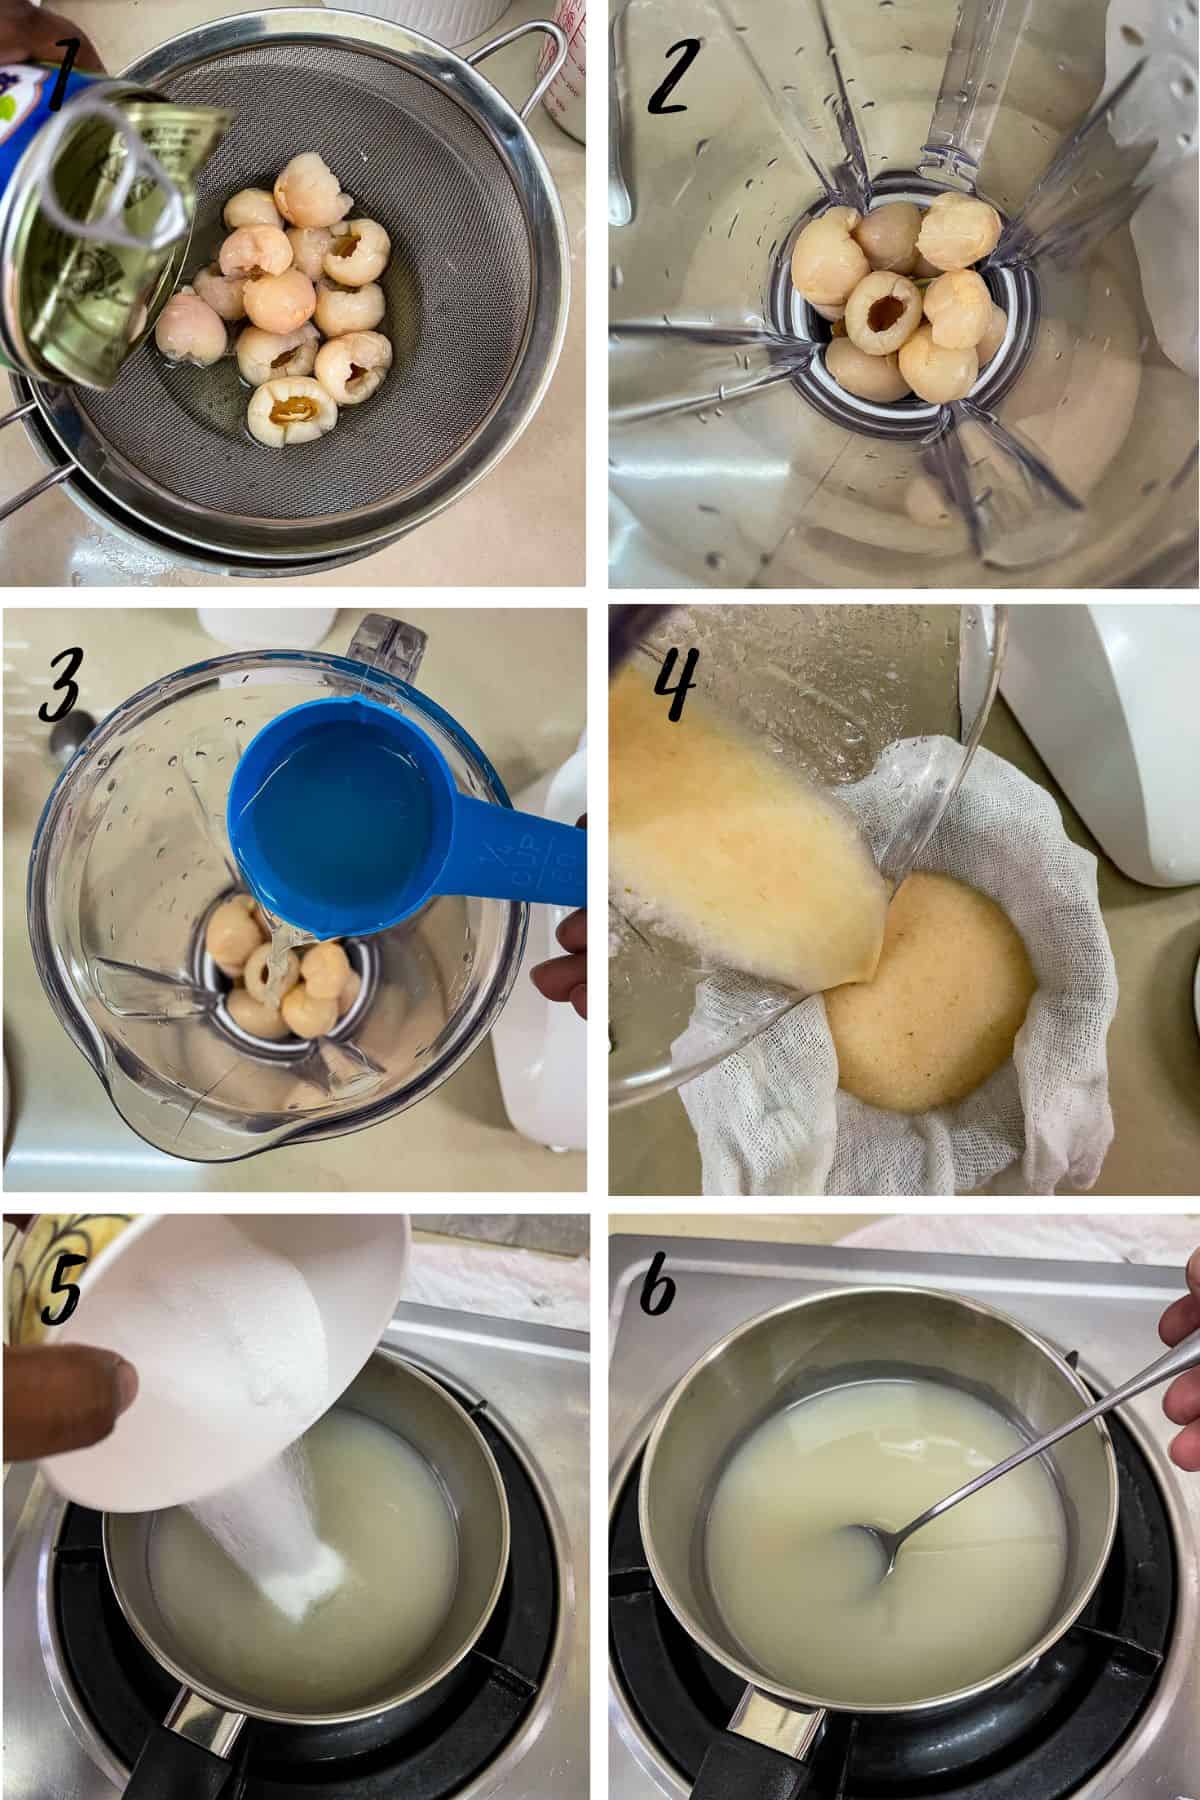 A poster of 6 images showing how to make lychee syrup.